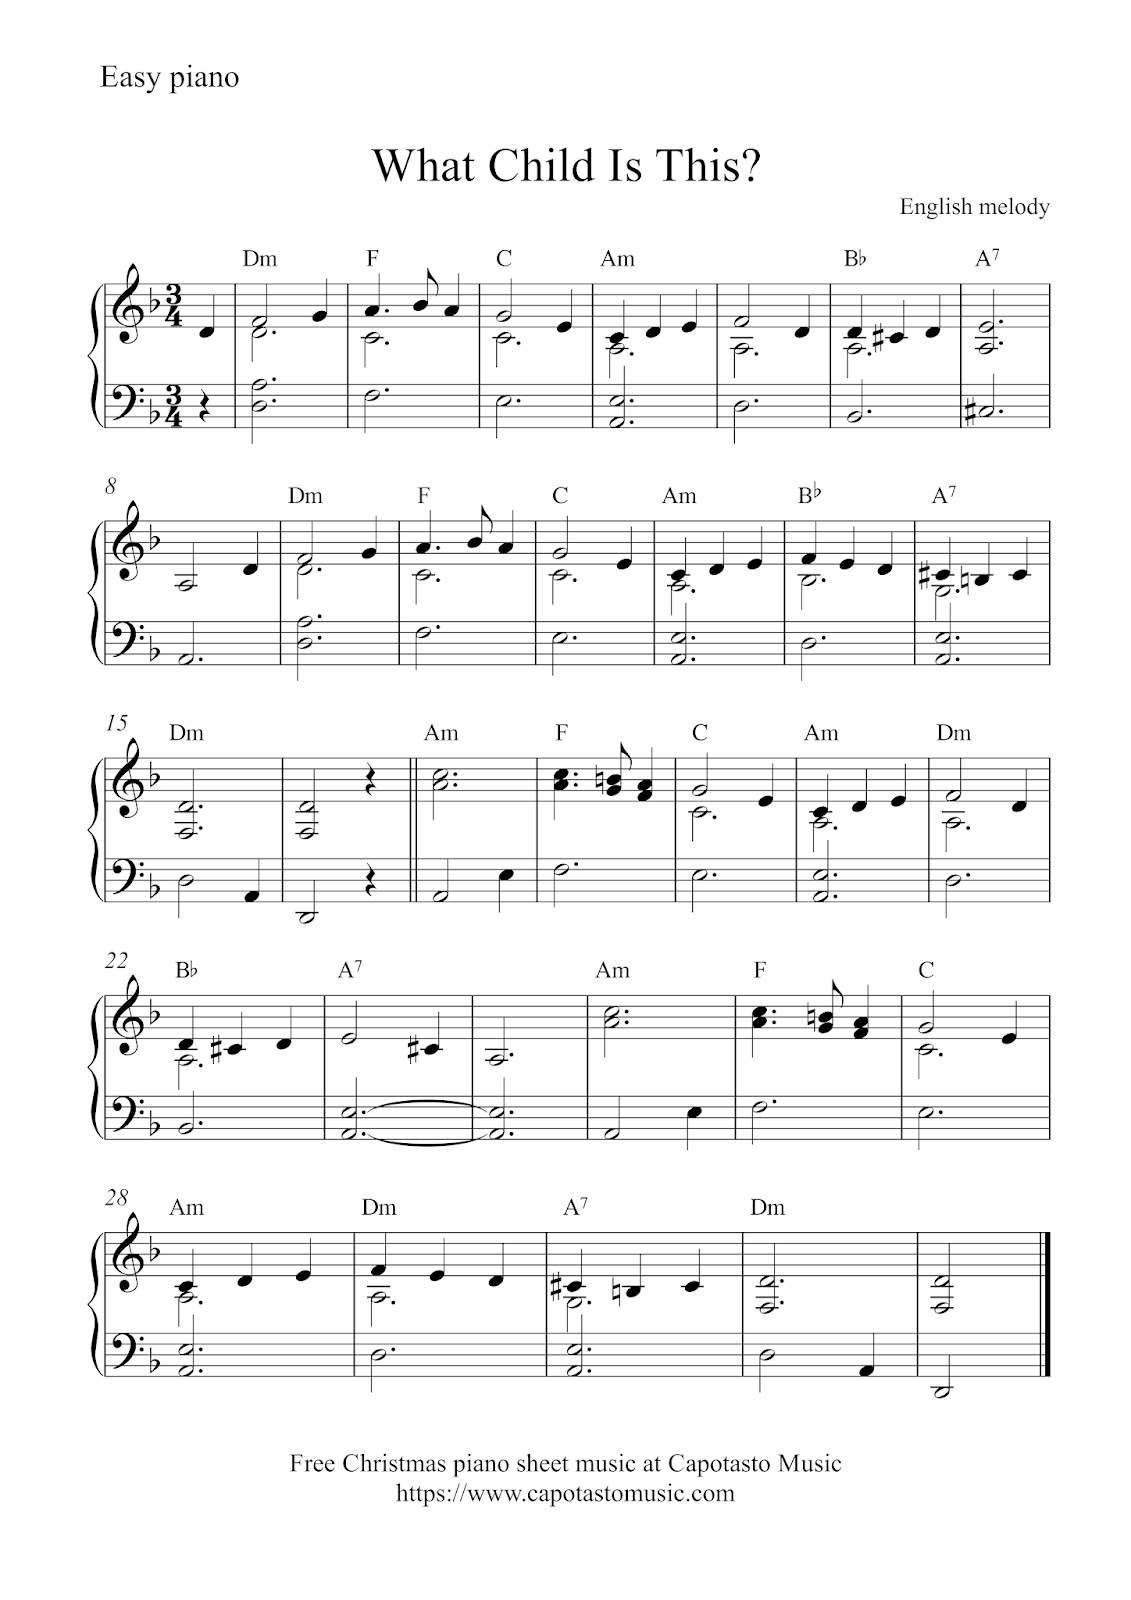 Free Easy Christmas Piano Sheet Music | What Child Is This? - Free Printable Christmas Music Sheets Piano